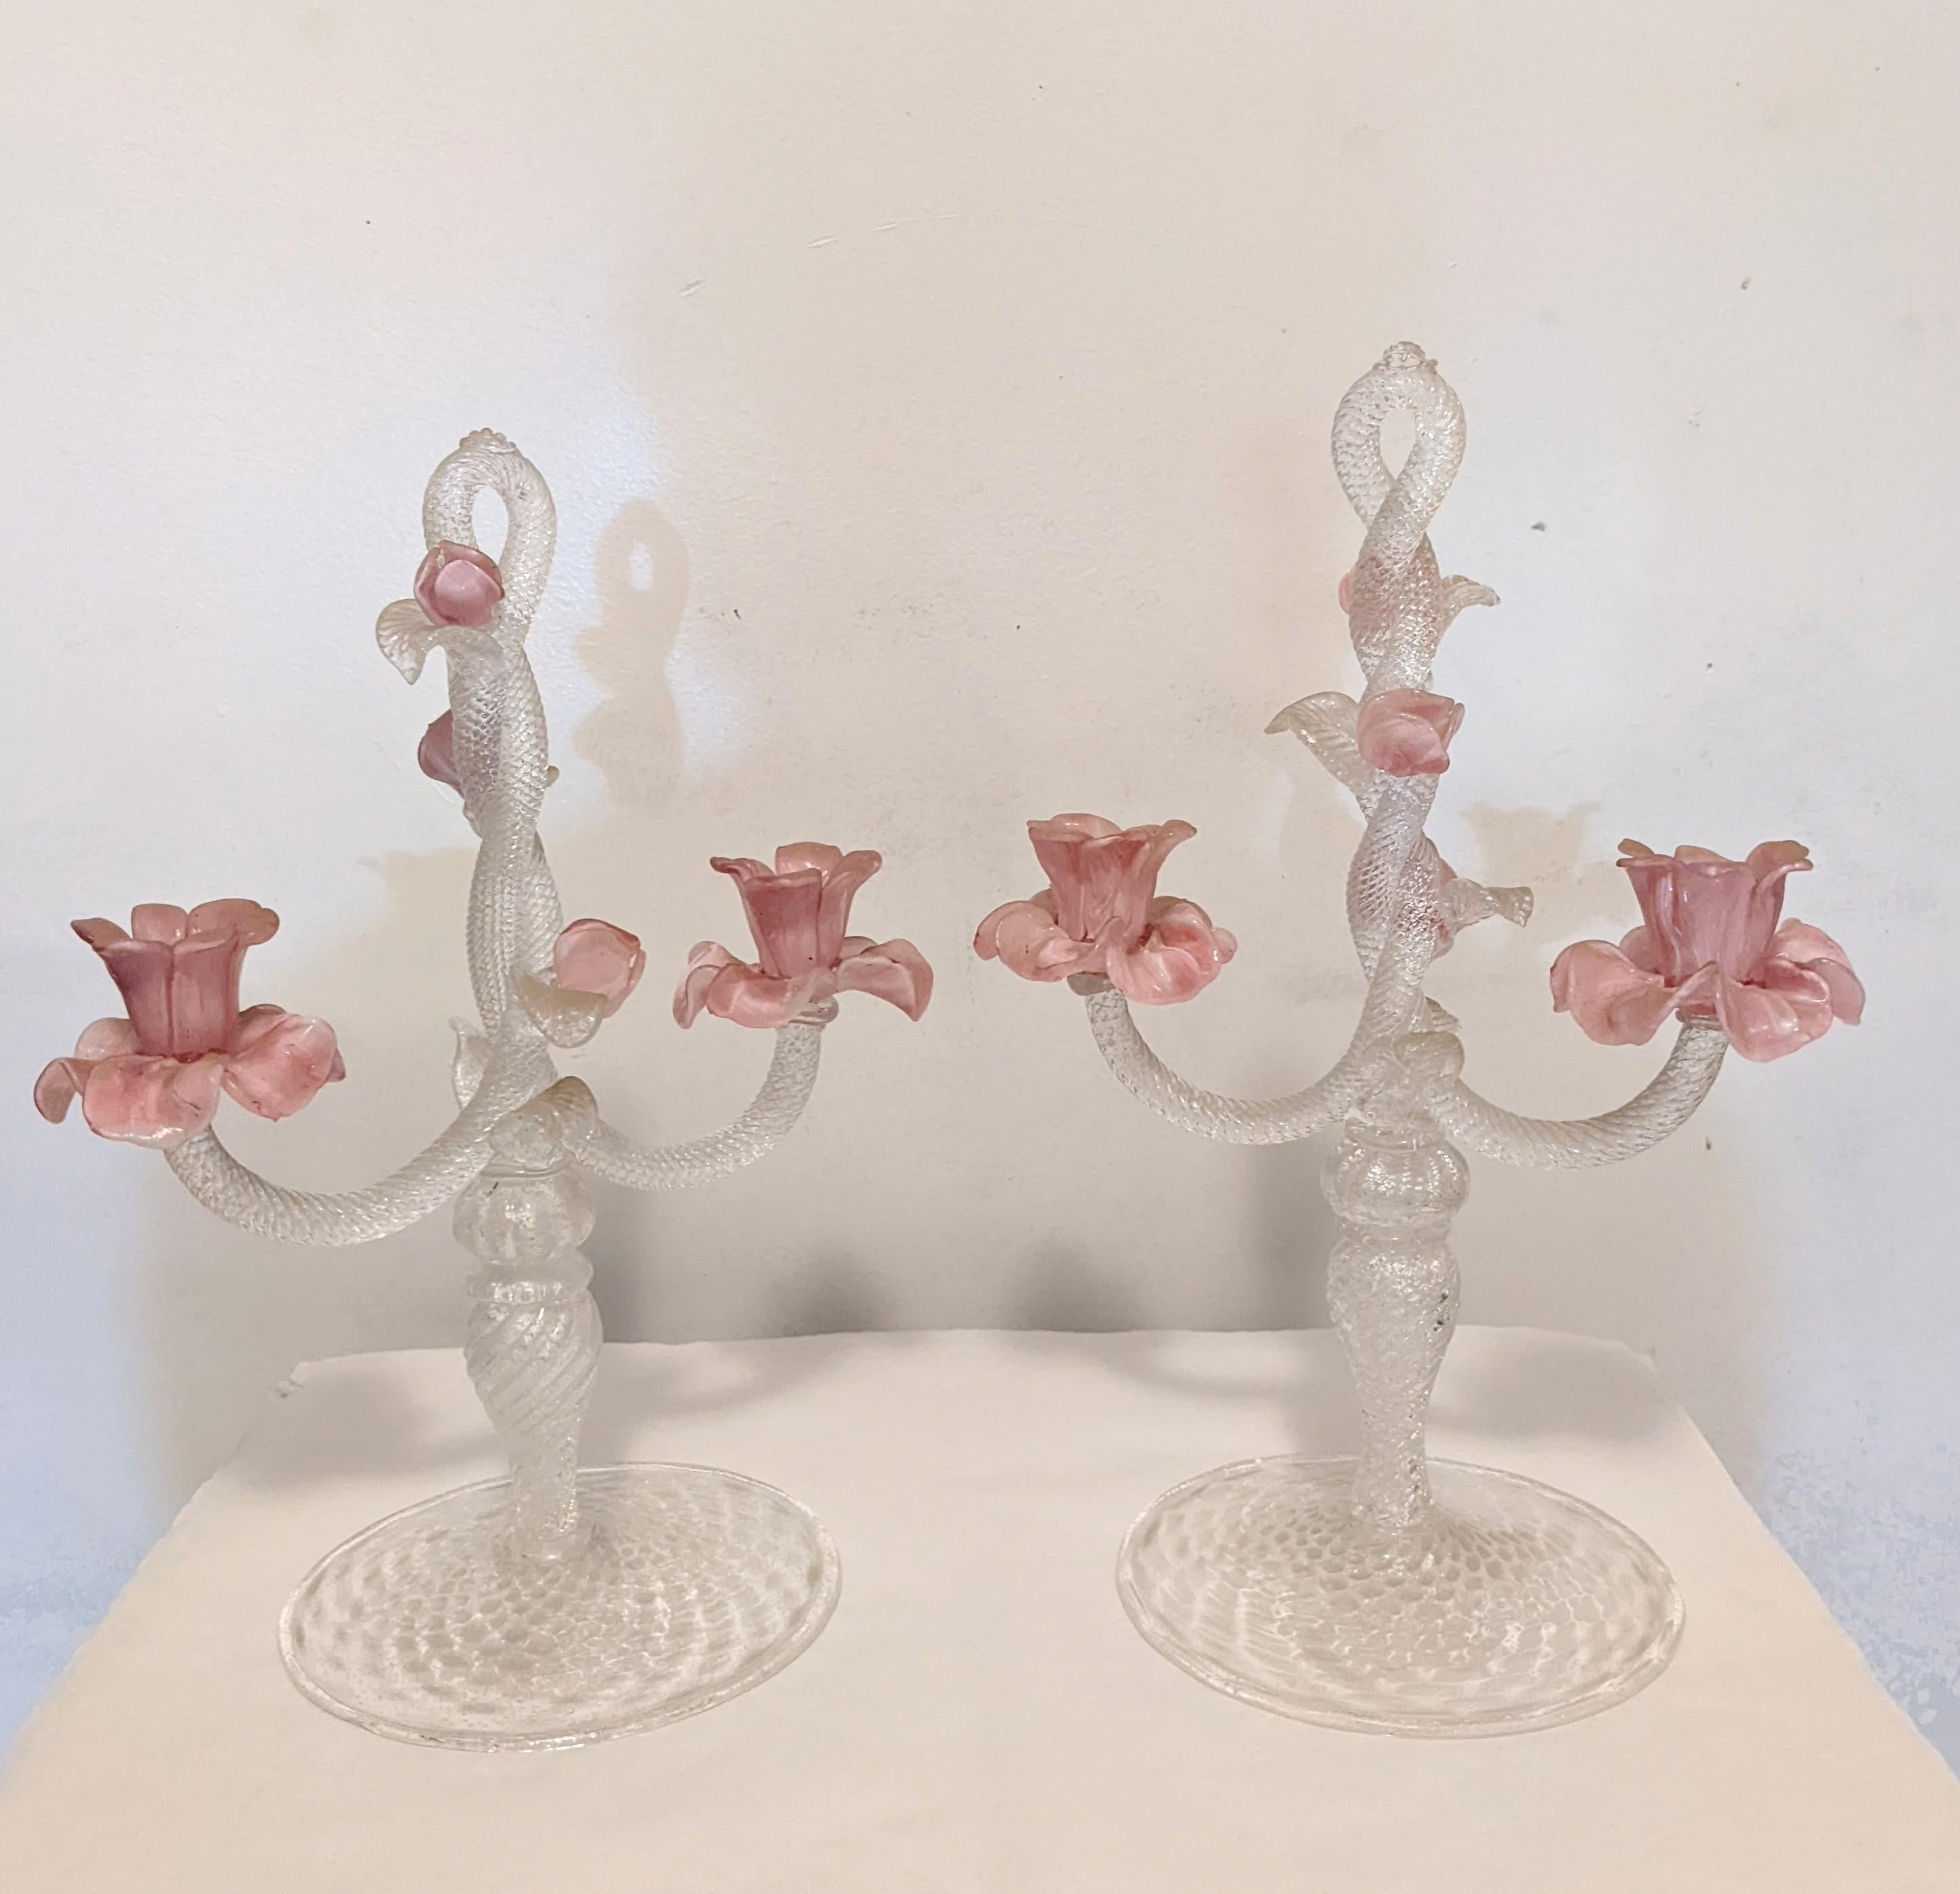 Gorgeous pair of large antique Murano hand blown glass candlesticks with gorgeous swirls of silver flecks with pink opaline rose buds. Beautifully rendered with twisted columns, leaves and buds with spaces for 2 candles on each candelabra. Crystal